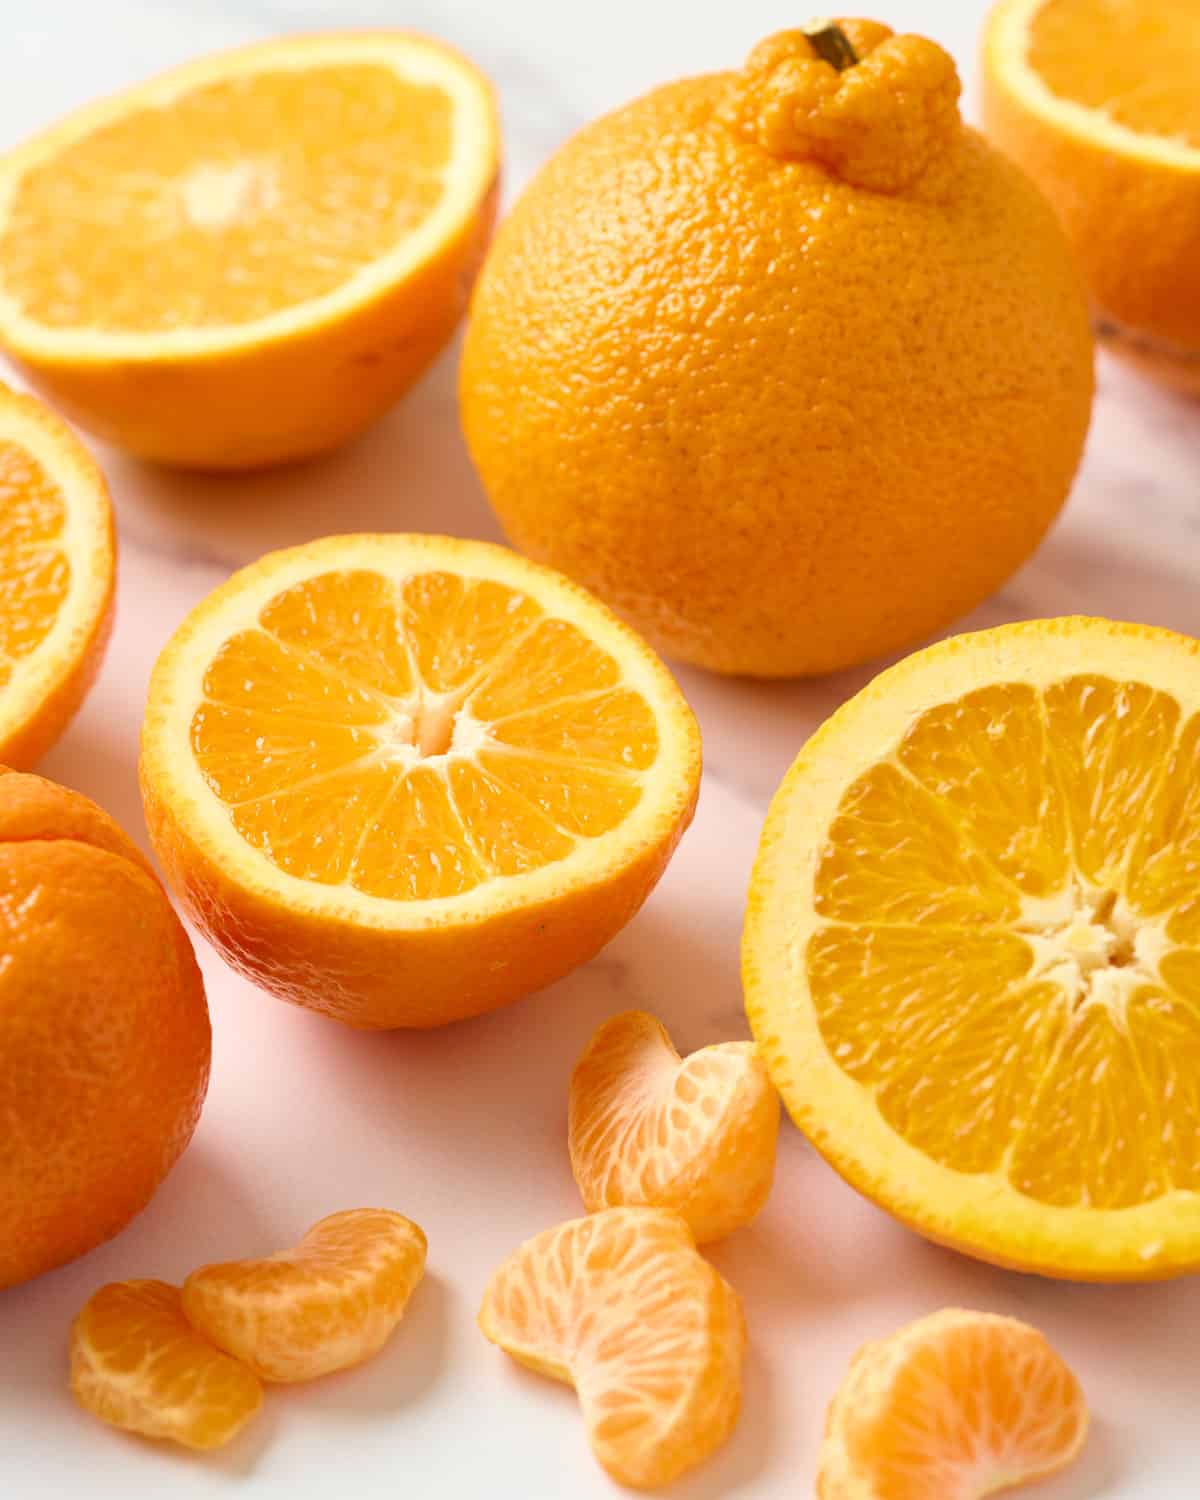 Different types of oranges for juicing.